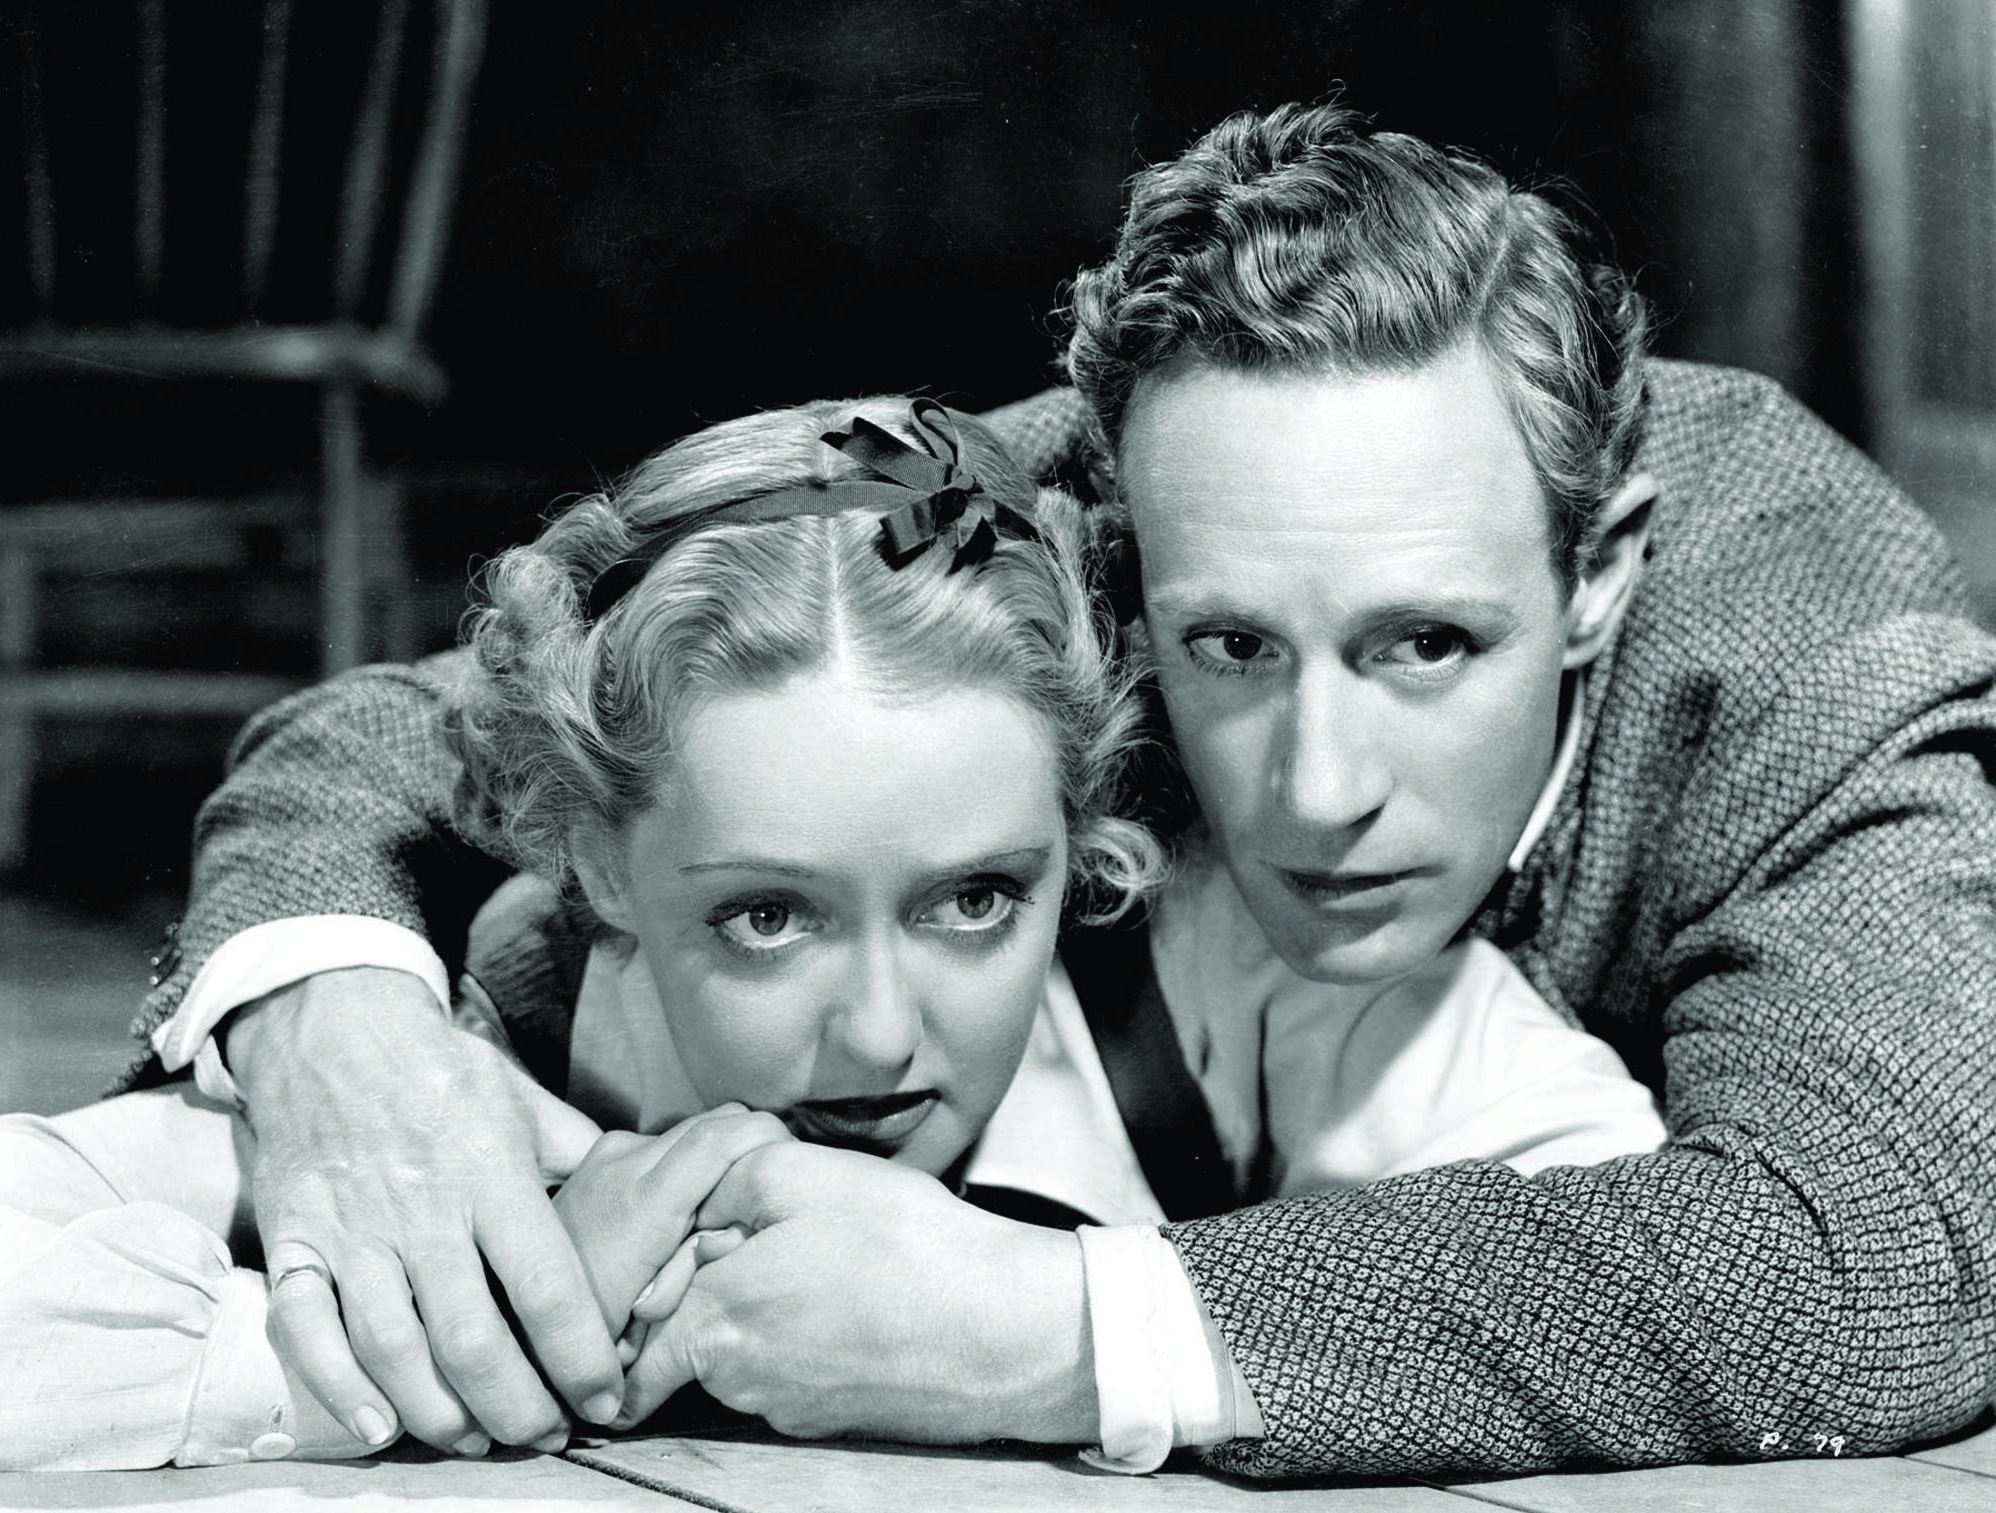 Still of Bette Davis and Leslie Howard in The Petrified Forest (1936)